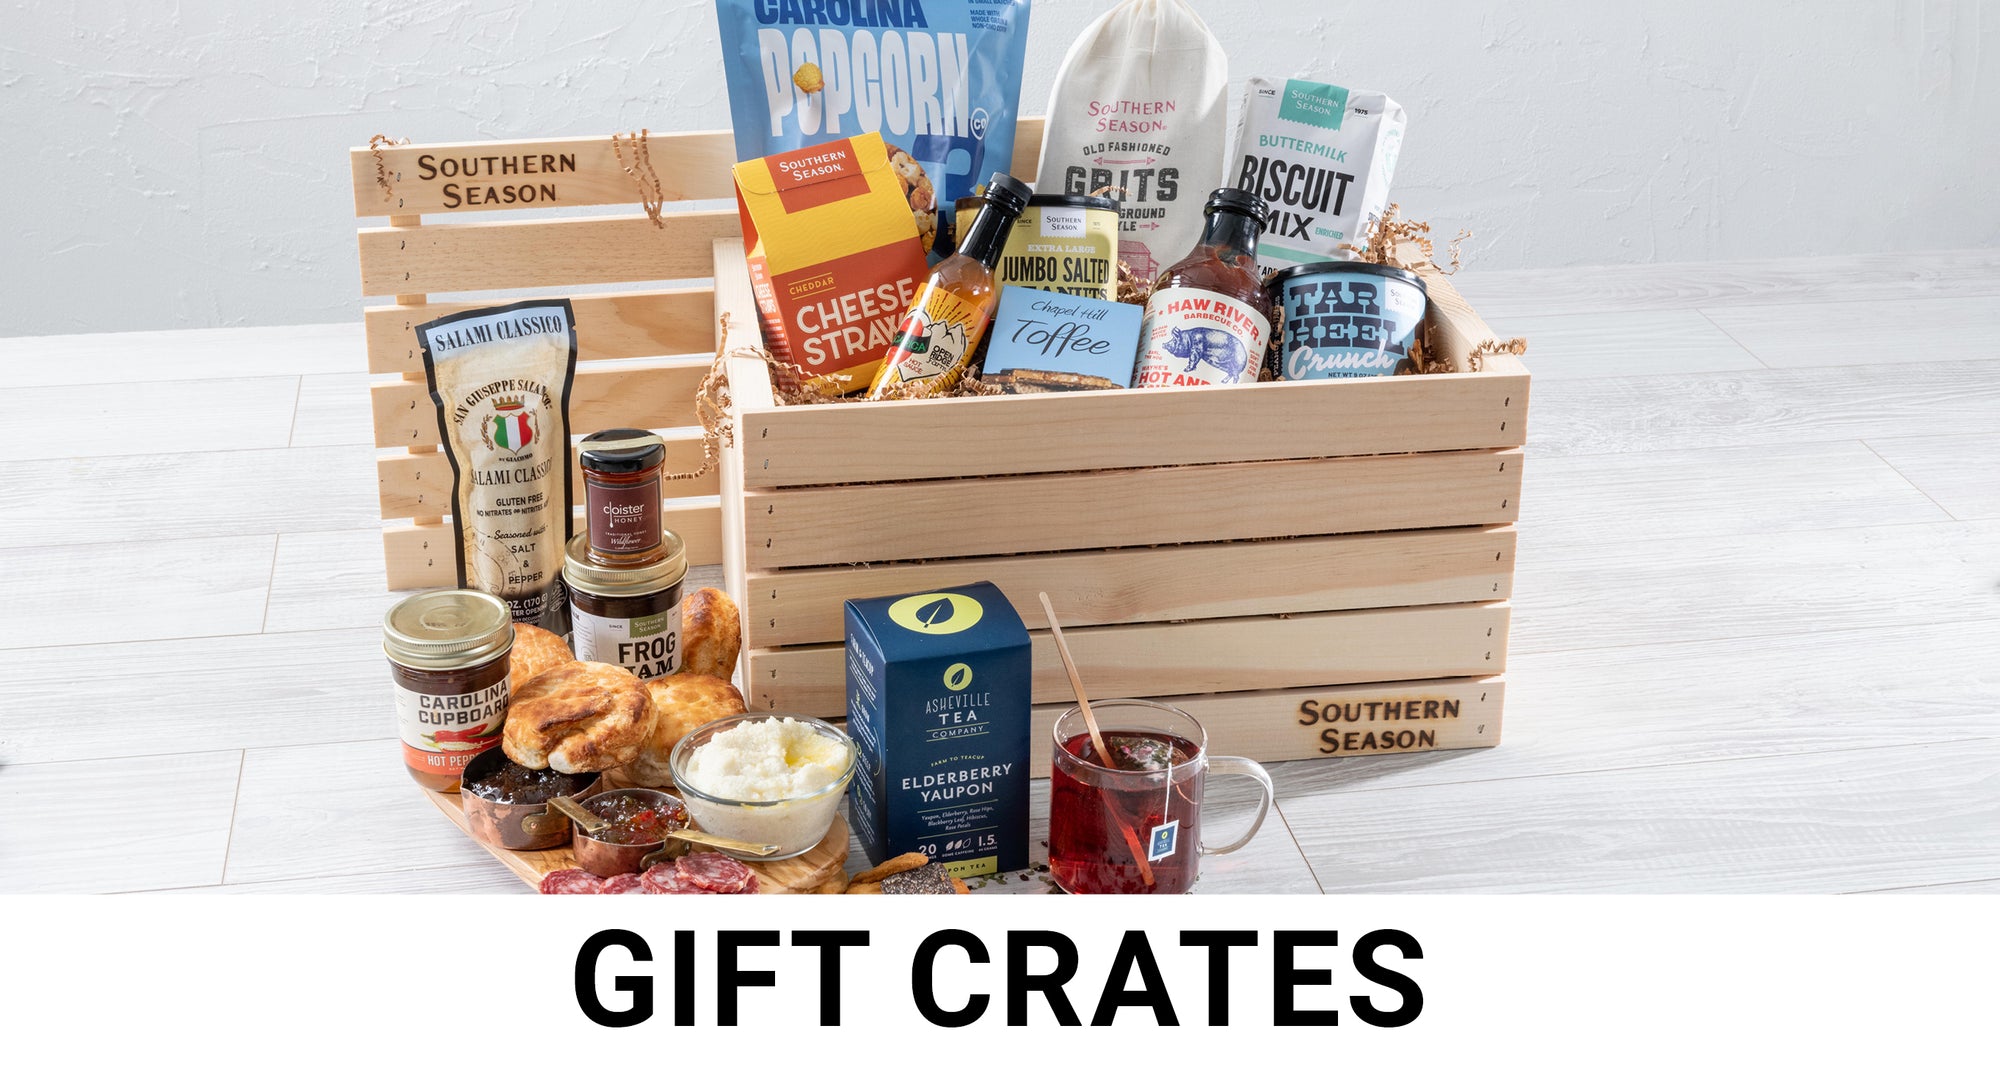 Gift Crates